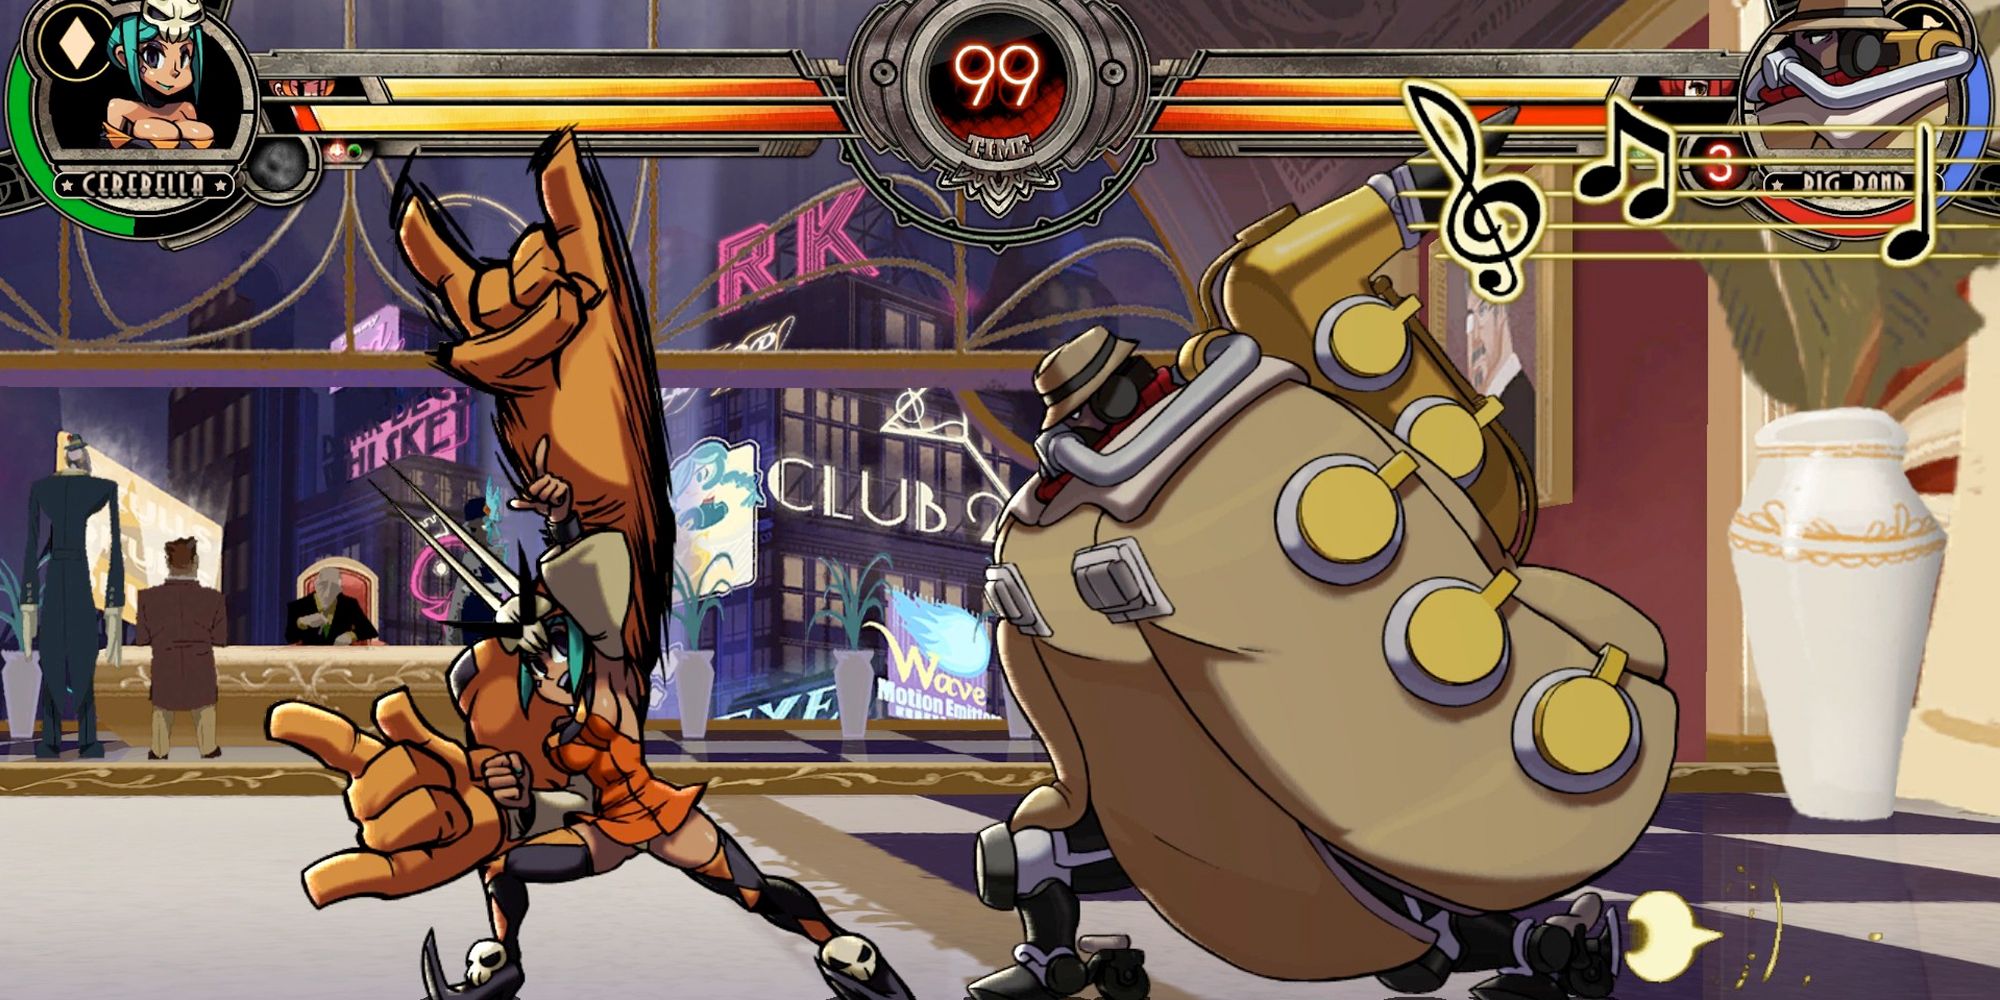 Big Band charges in to attack Cerebella with his music in Skullgirls